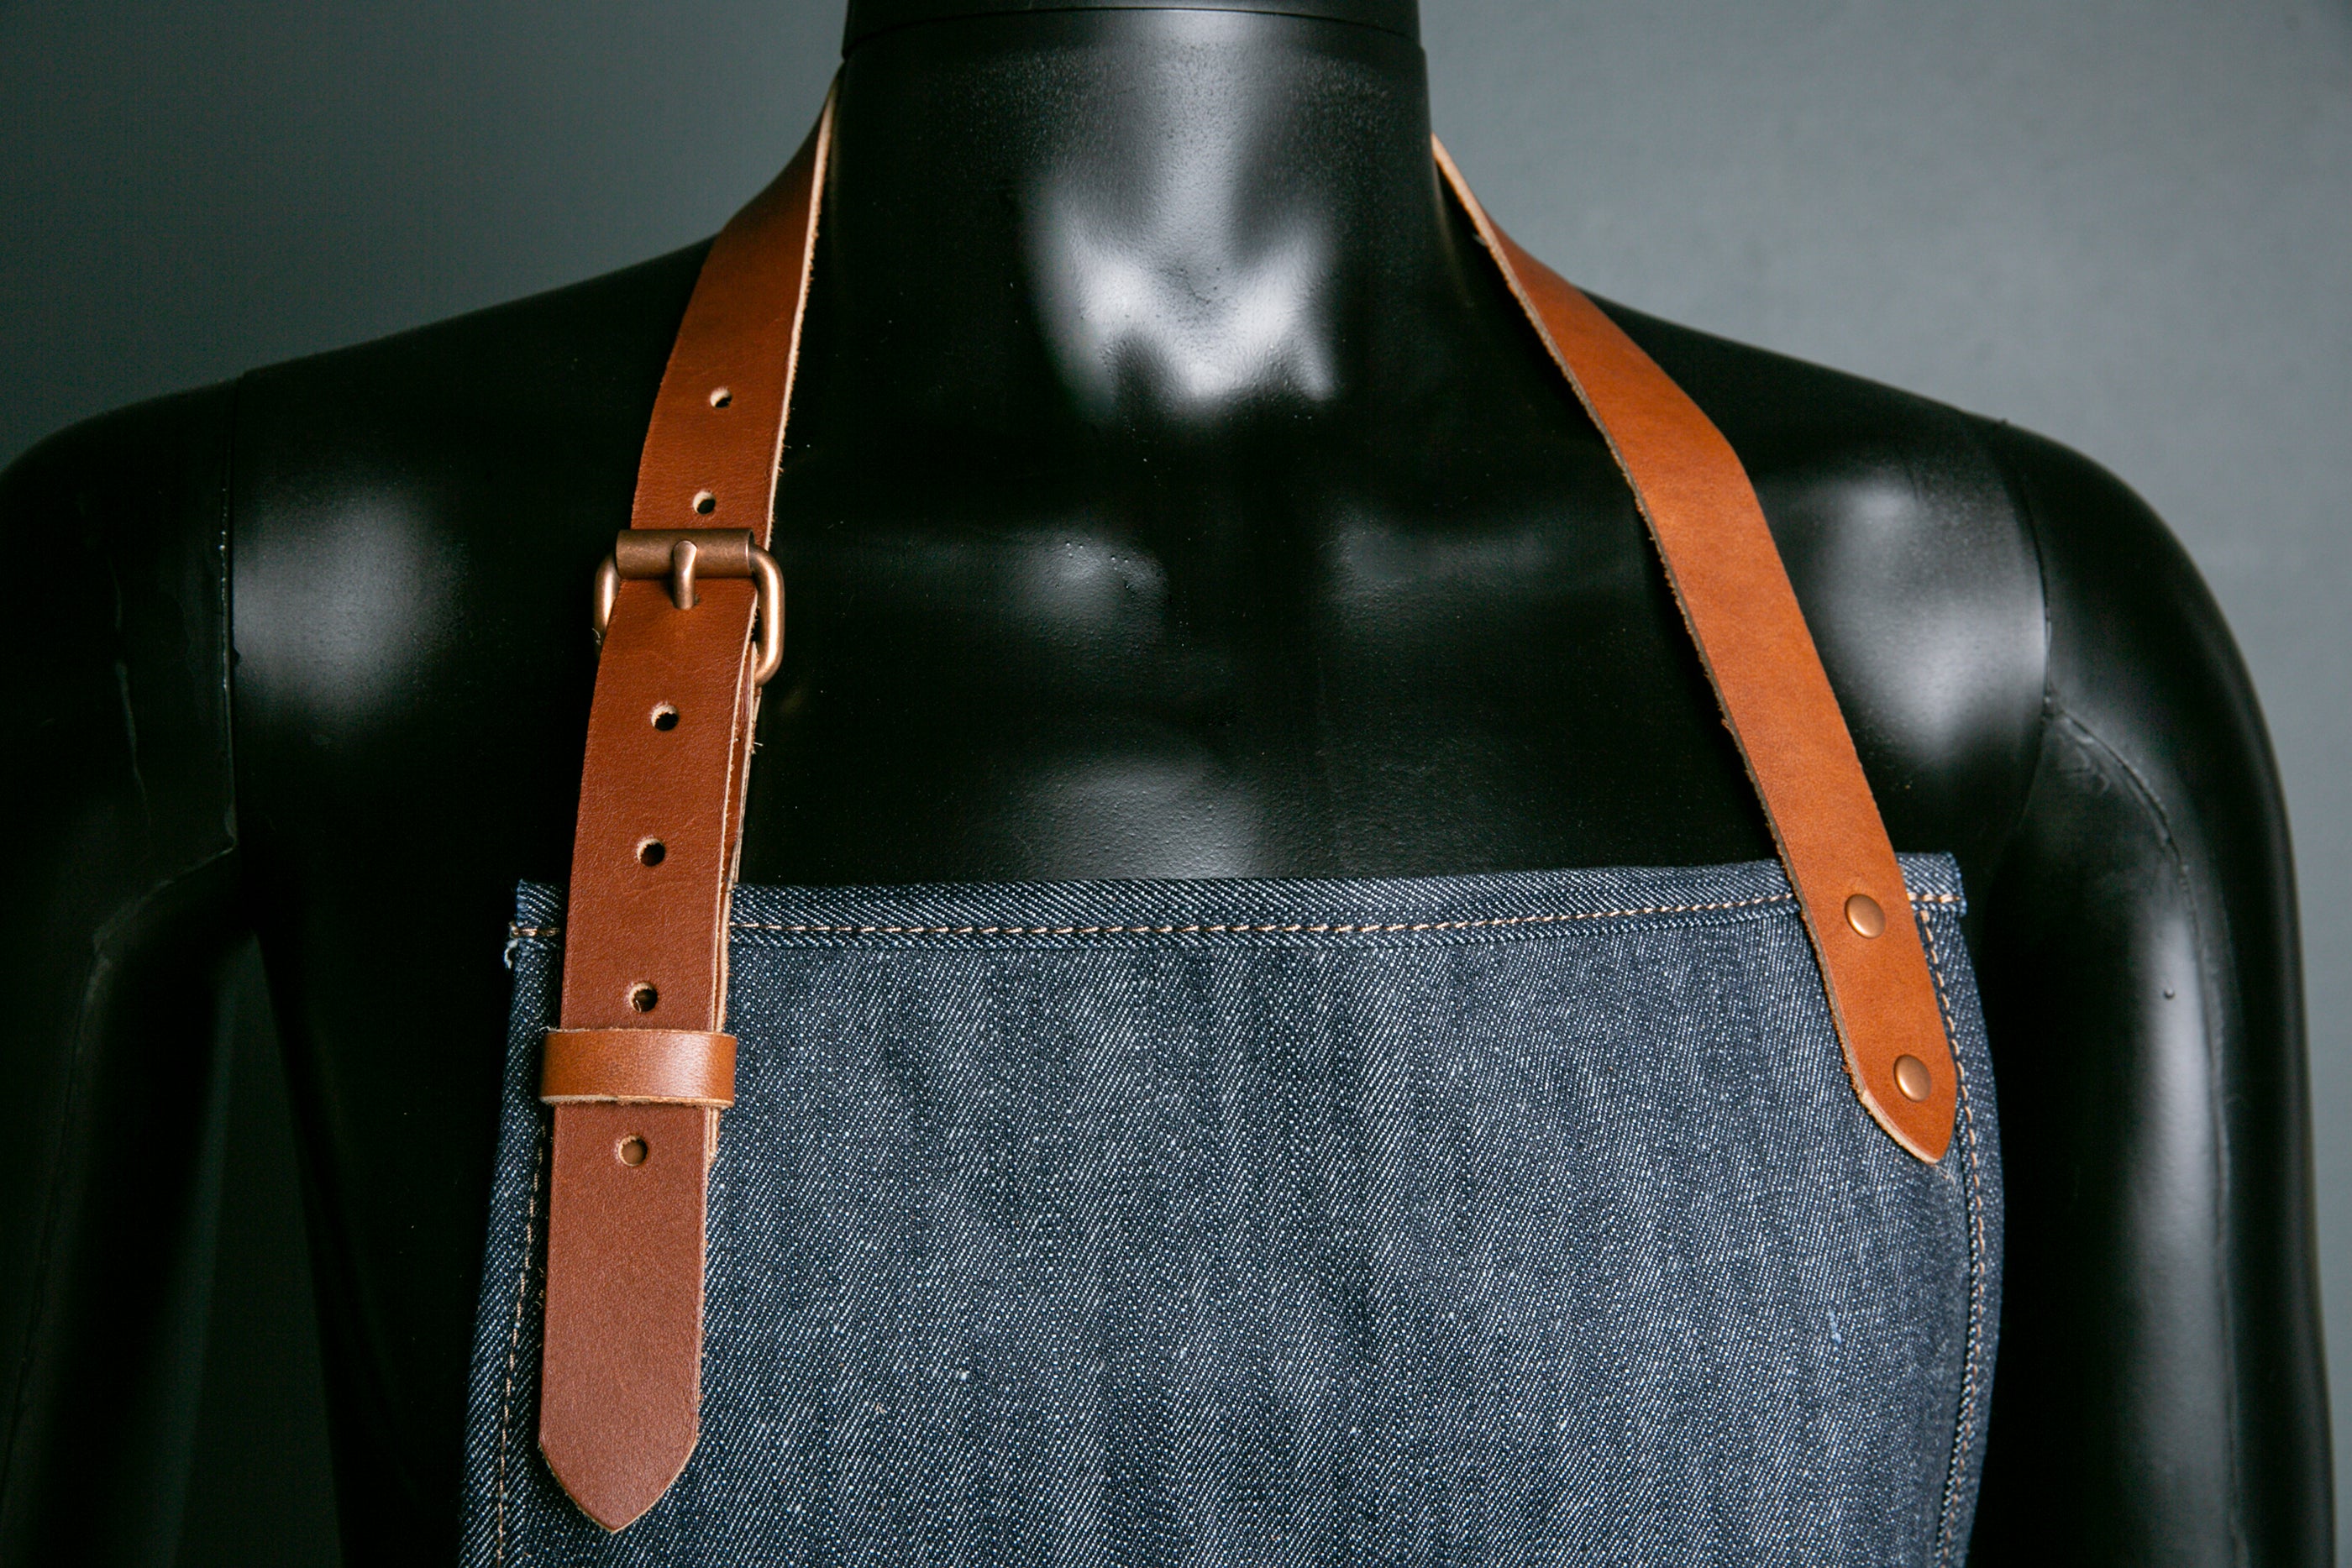 Denim and Leather Apron